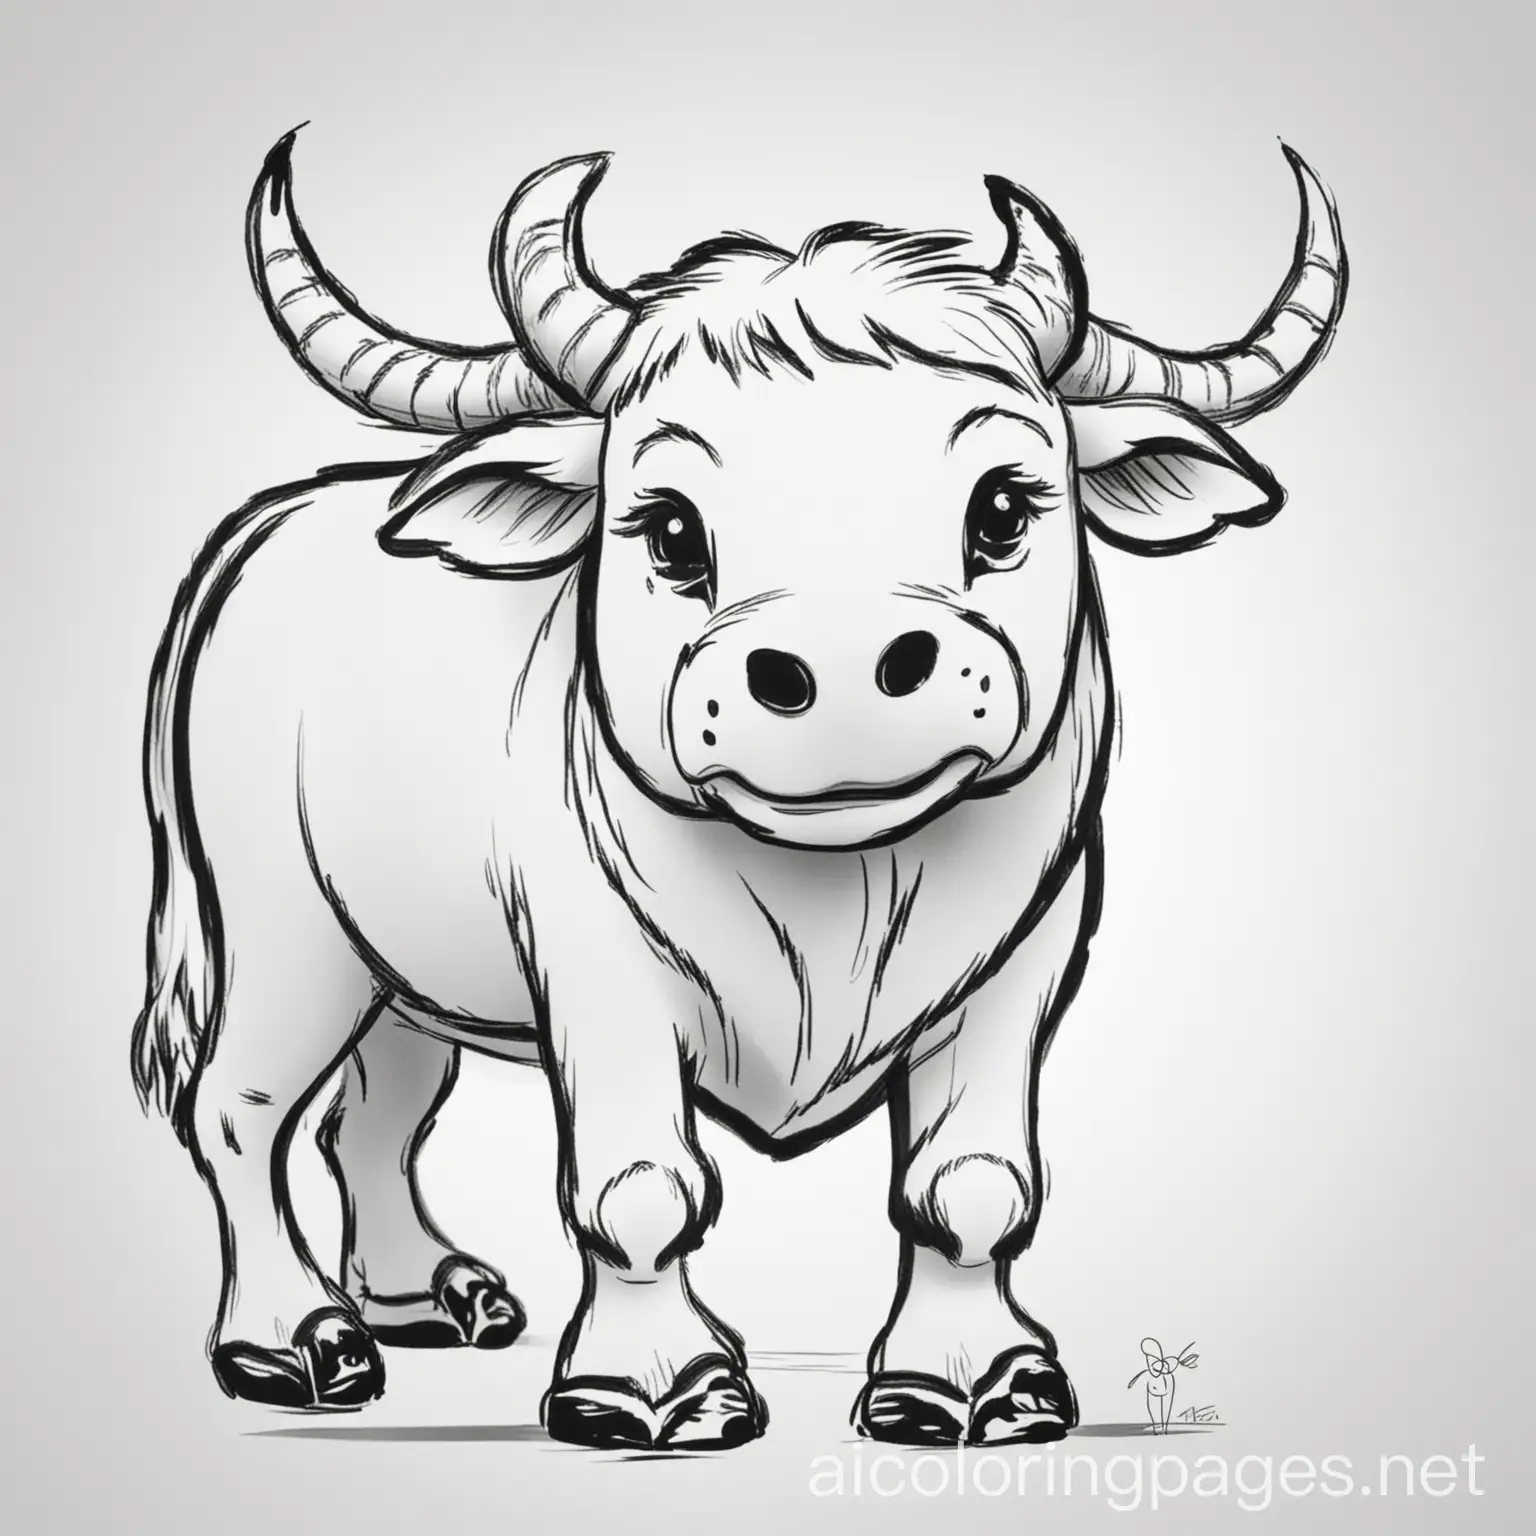 black-faced ox, Coloring Page, black and white, line art, white background, Simplicity, Ample White Space. The background of the coloring page is plain white to make it easy for young children to color within the lines. The outlines of all the subjects are easy to distinguish, making it simple for kids to color without too much difficulty